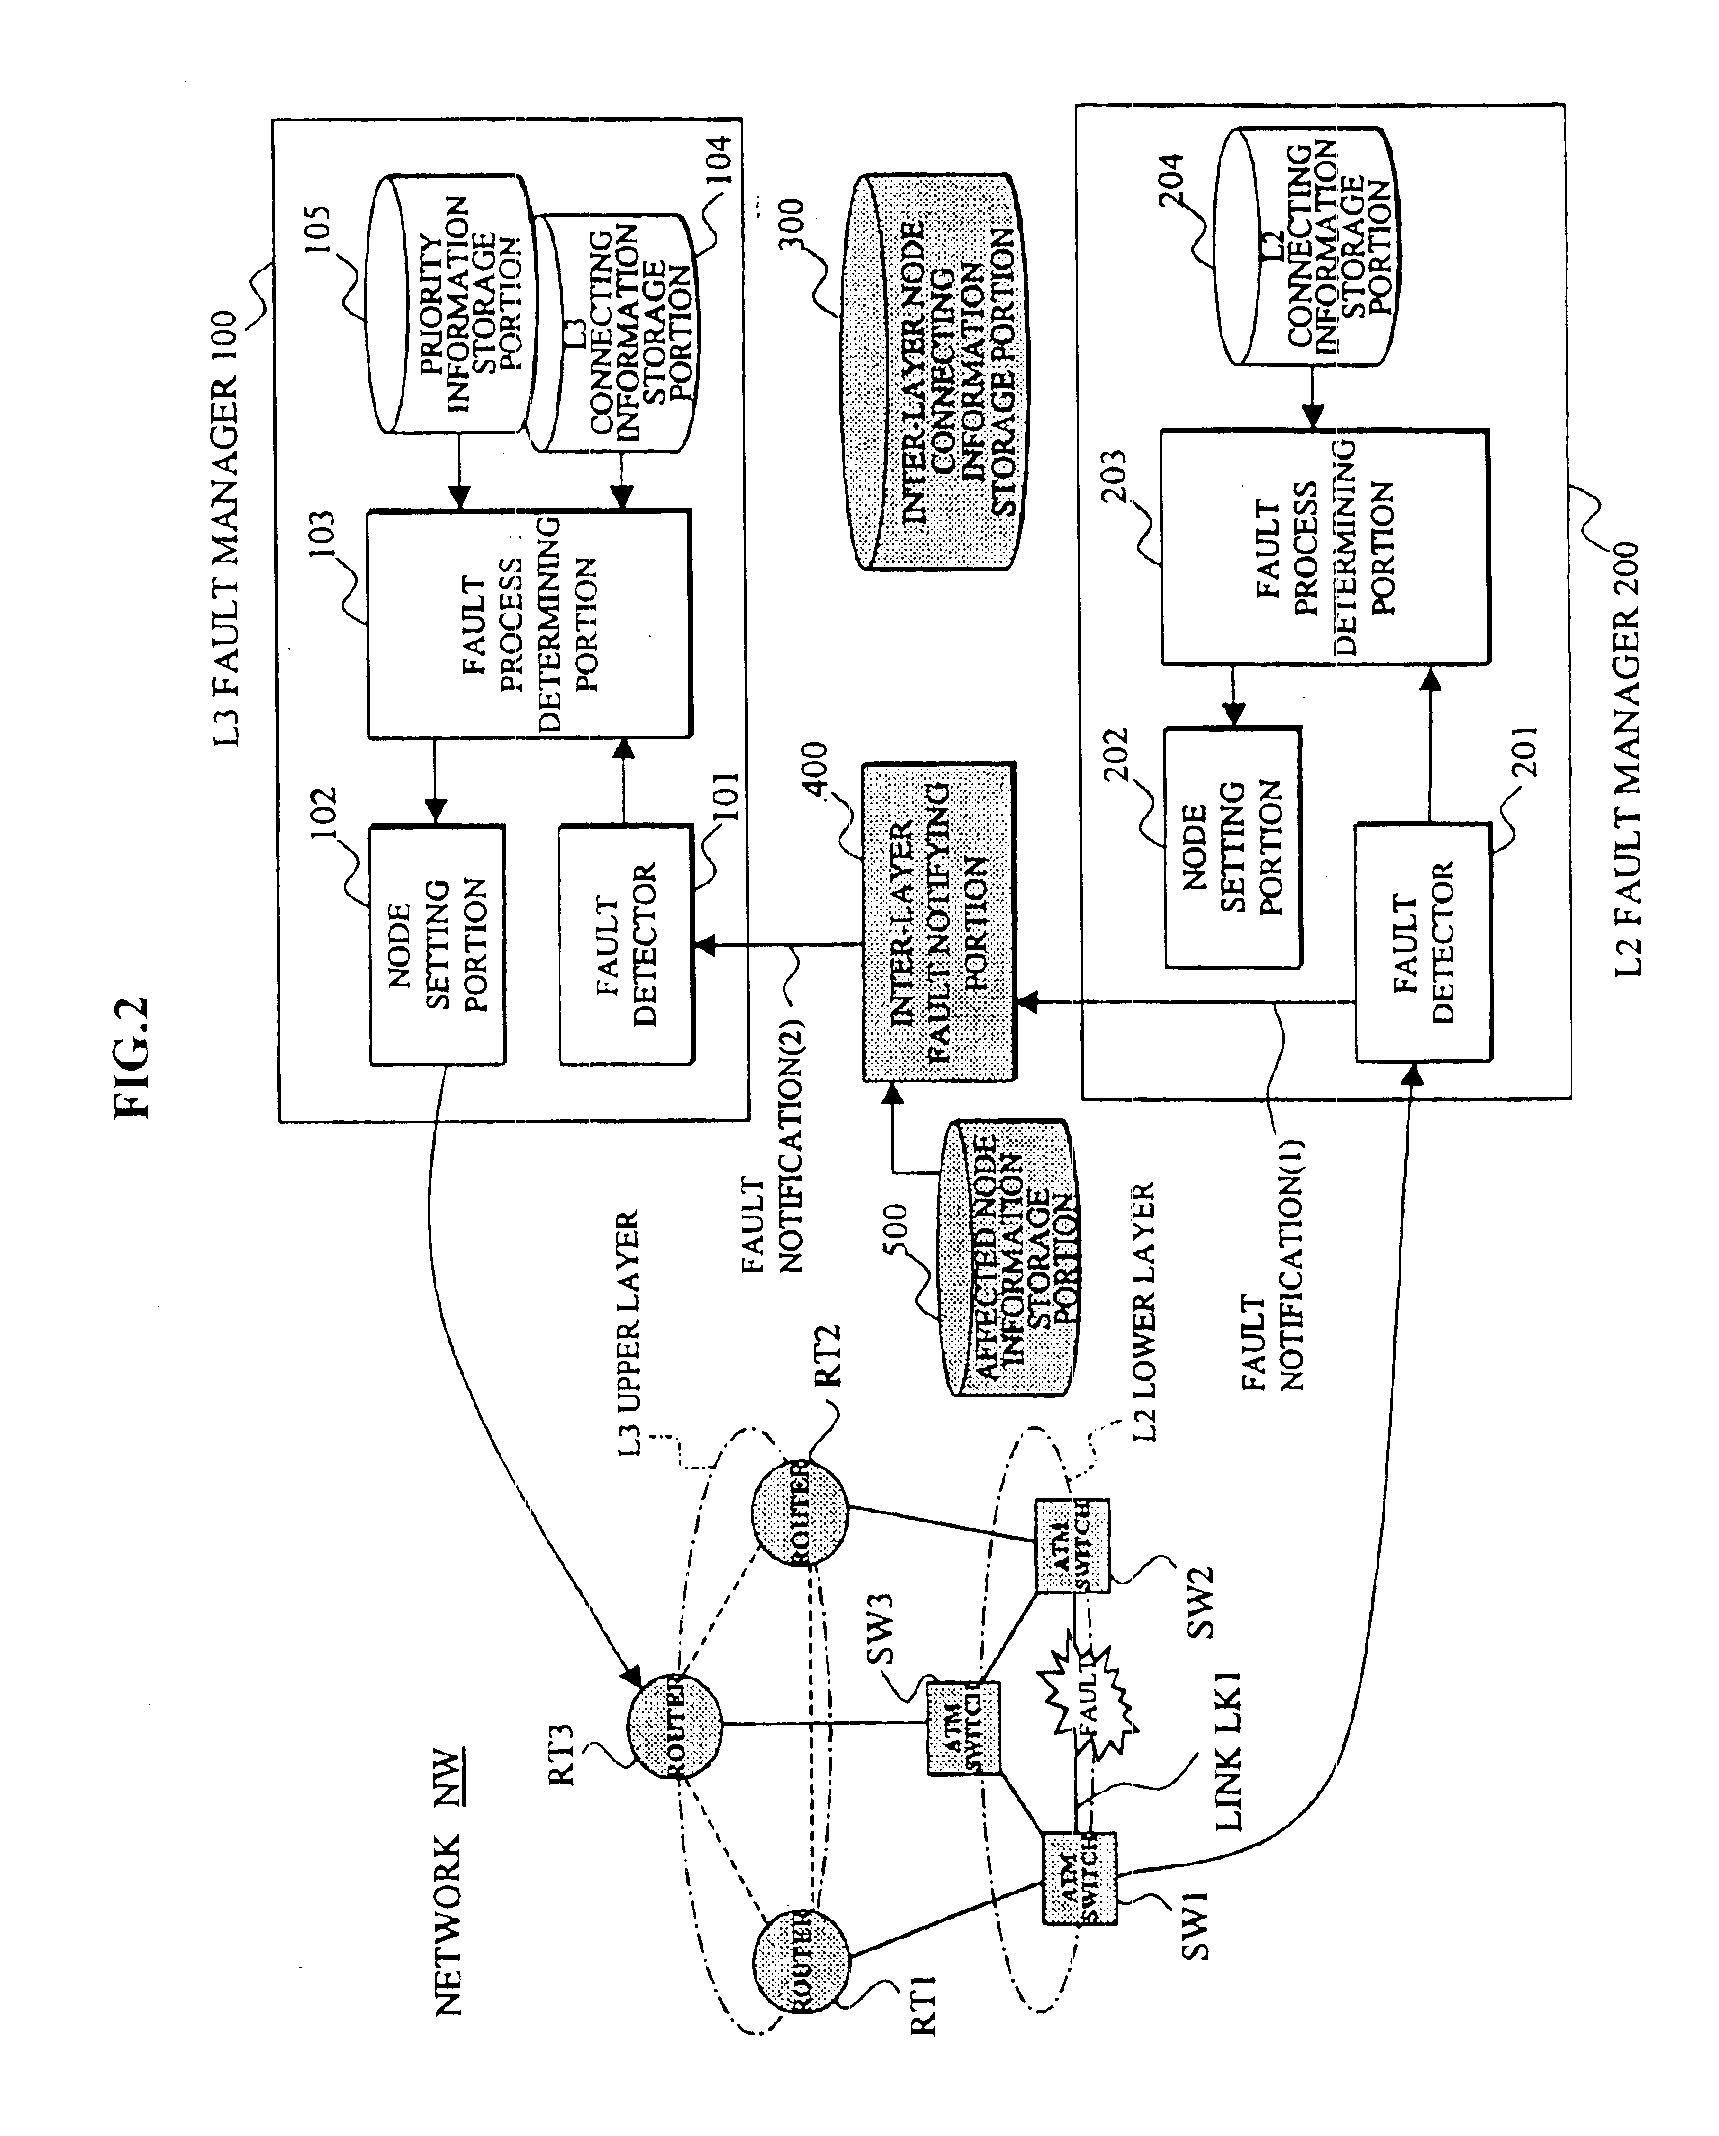 Network management system utilizing notification between fault manager for packet switching nodes of the higher-order network layer and fault manager for link offering nodes of the lower-order network layer